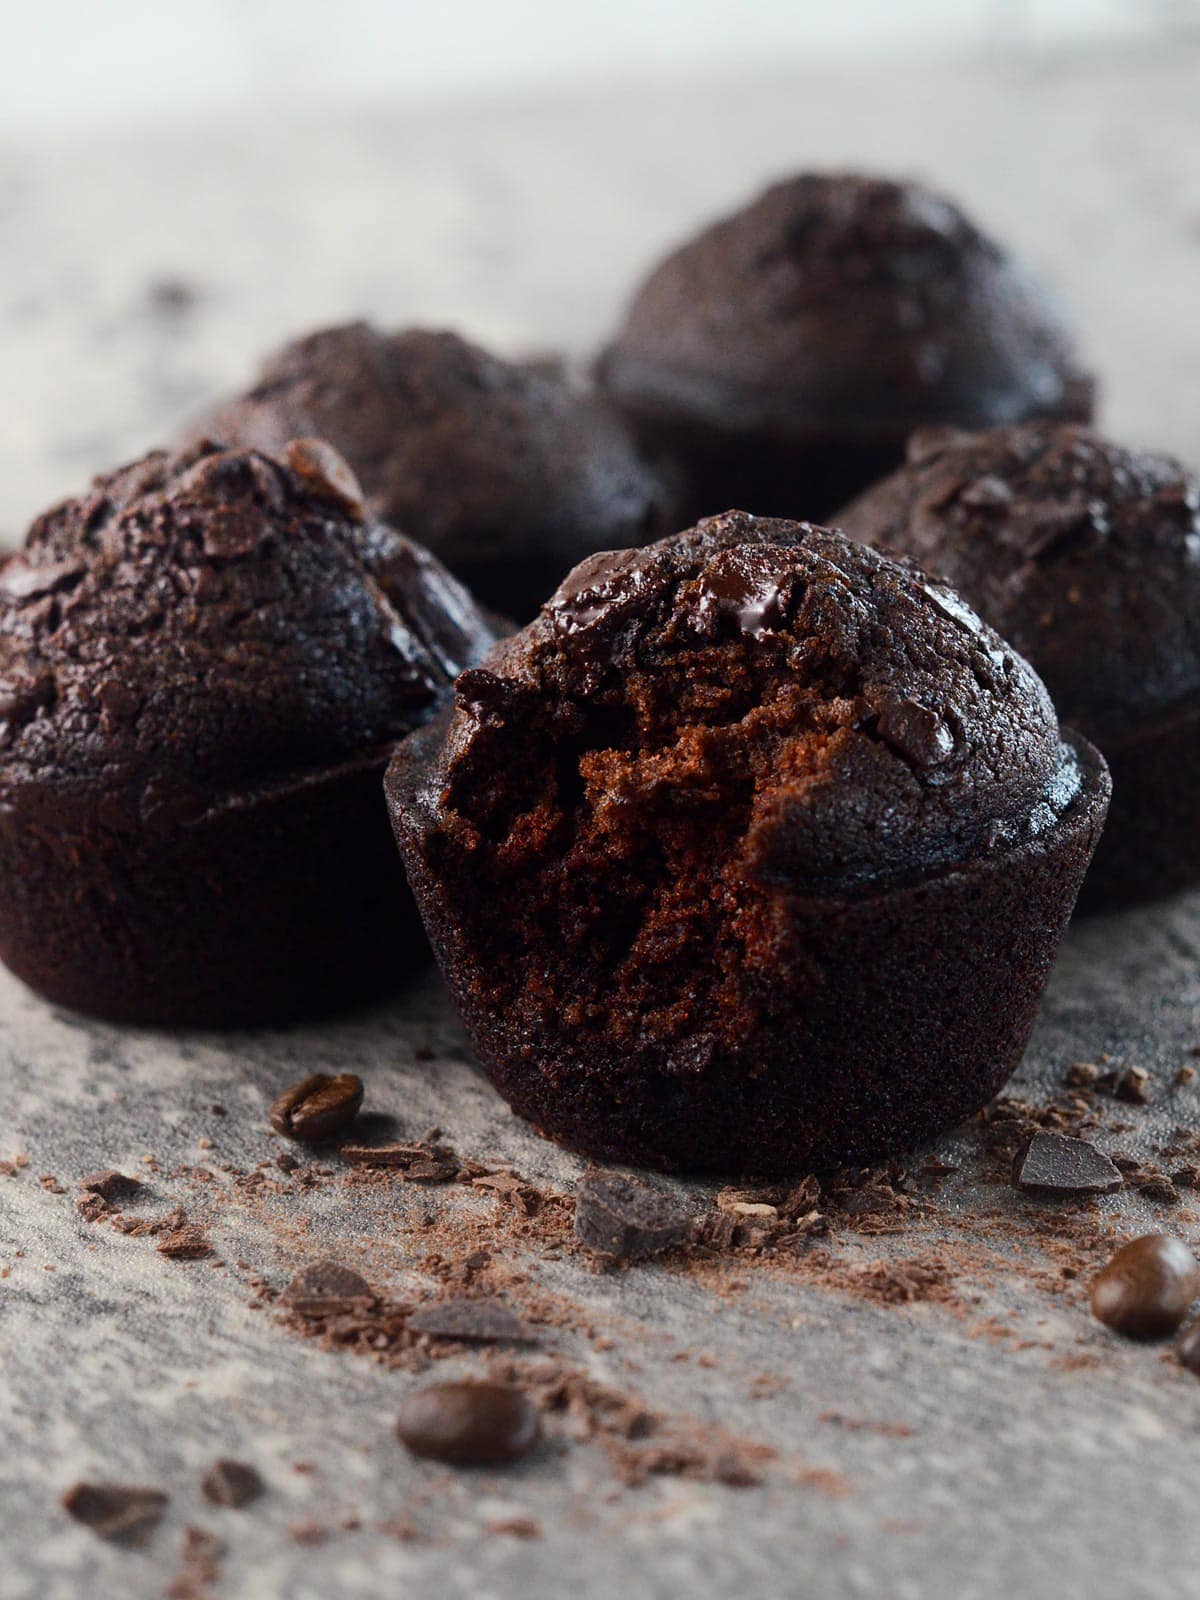 Double the chocolate, double the delight! These espresso-infused muffins are a chocolate lover's dream, with intense cocoa flavor and a kick of coffee to start your day on a sweet note. Perfect for coffee and chocolate enthusiasts alike!